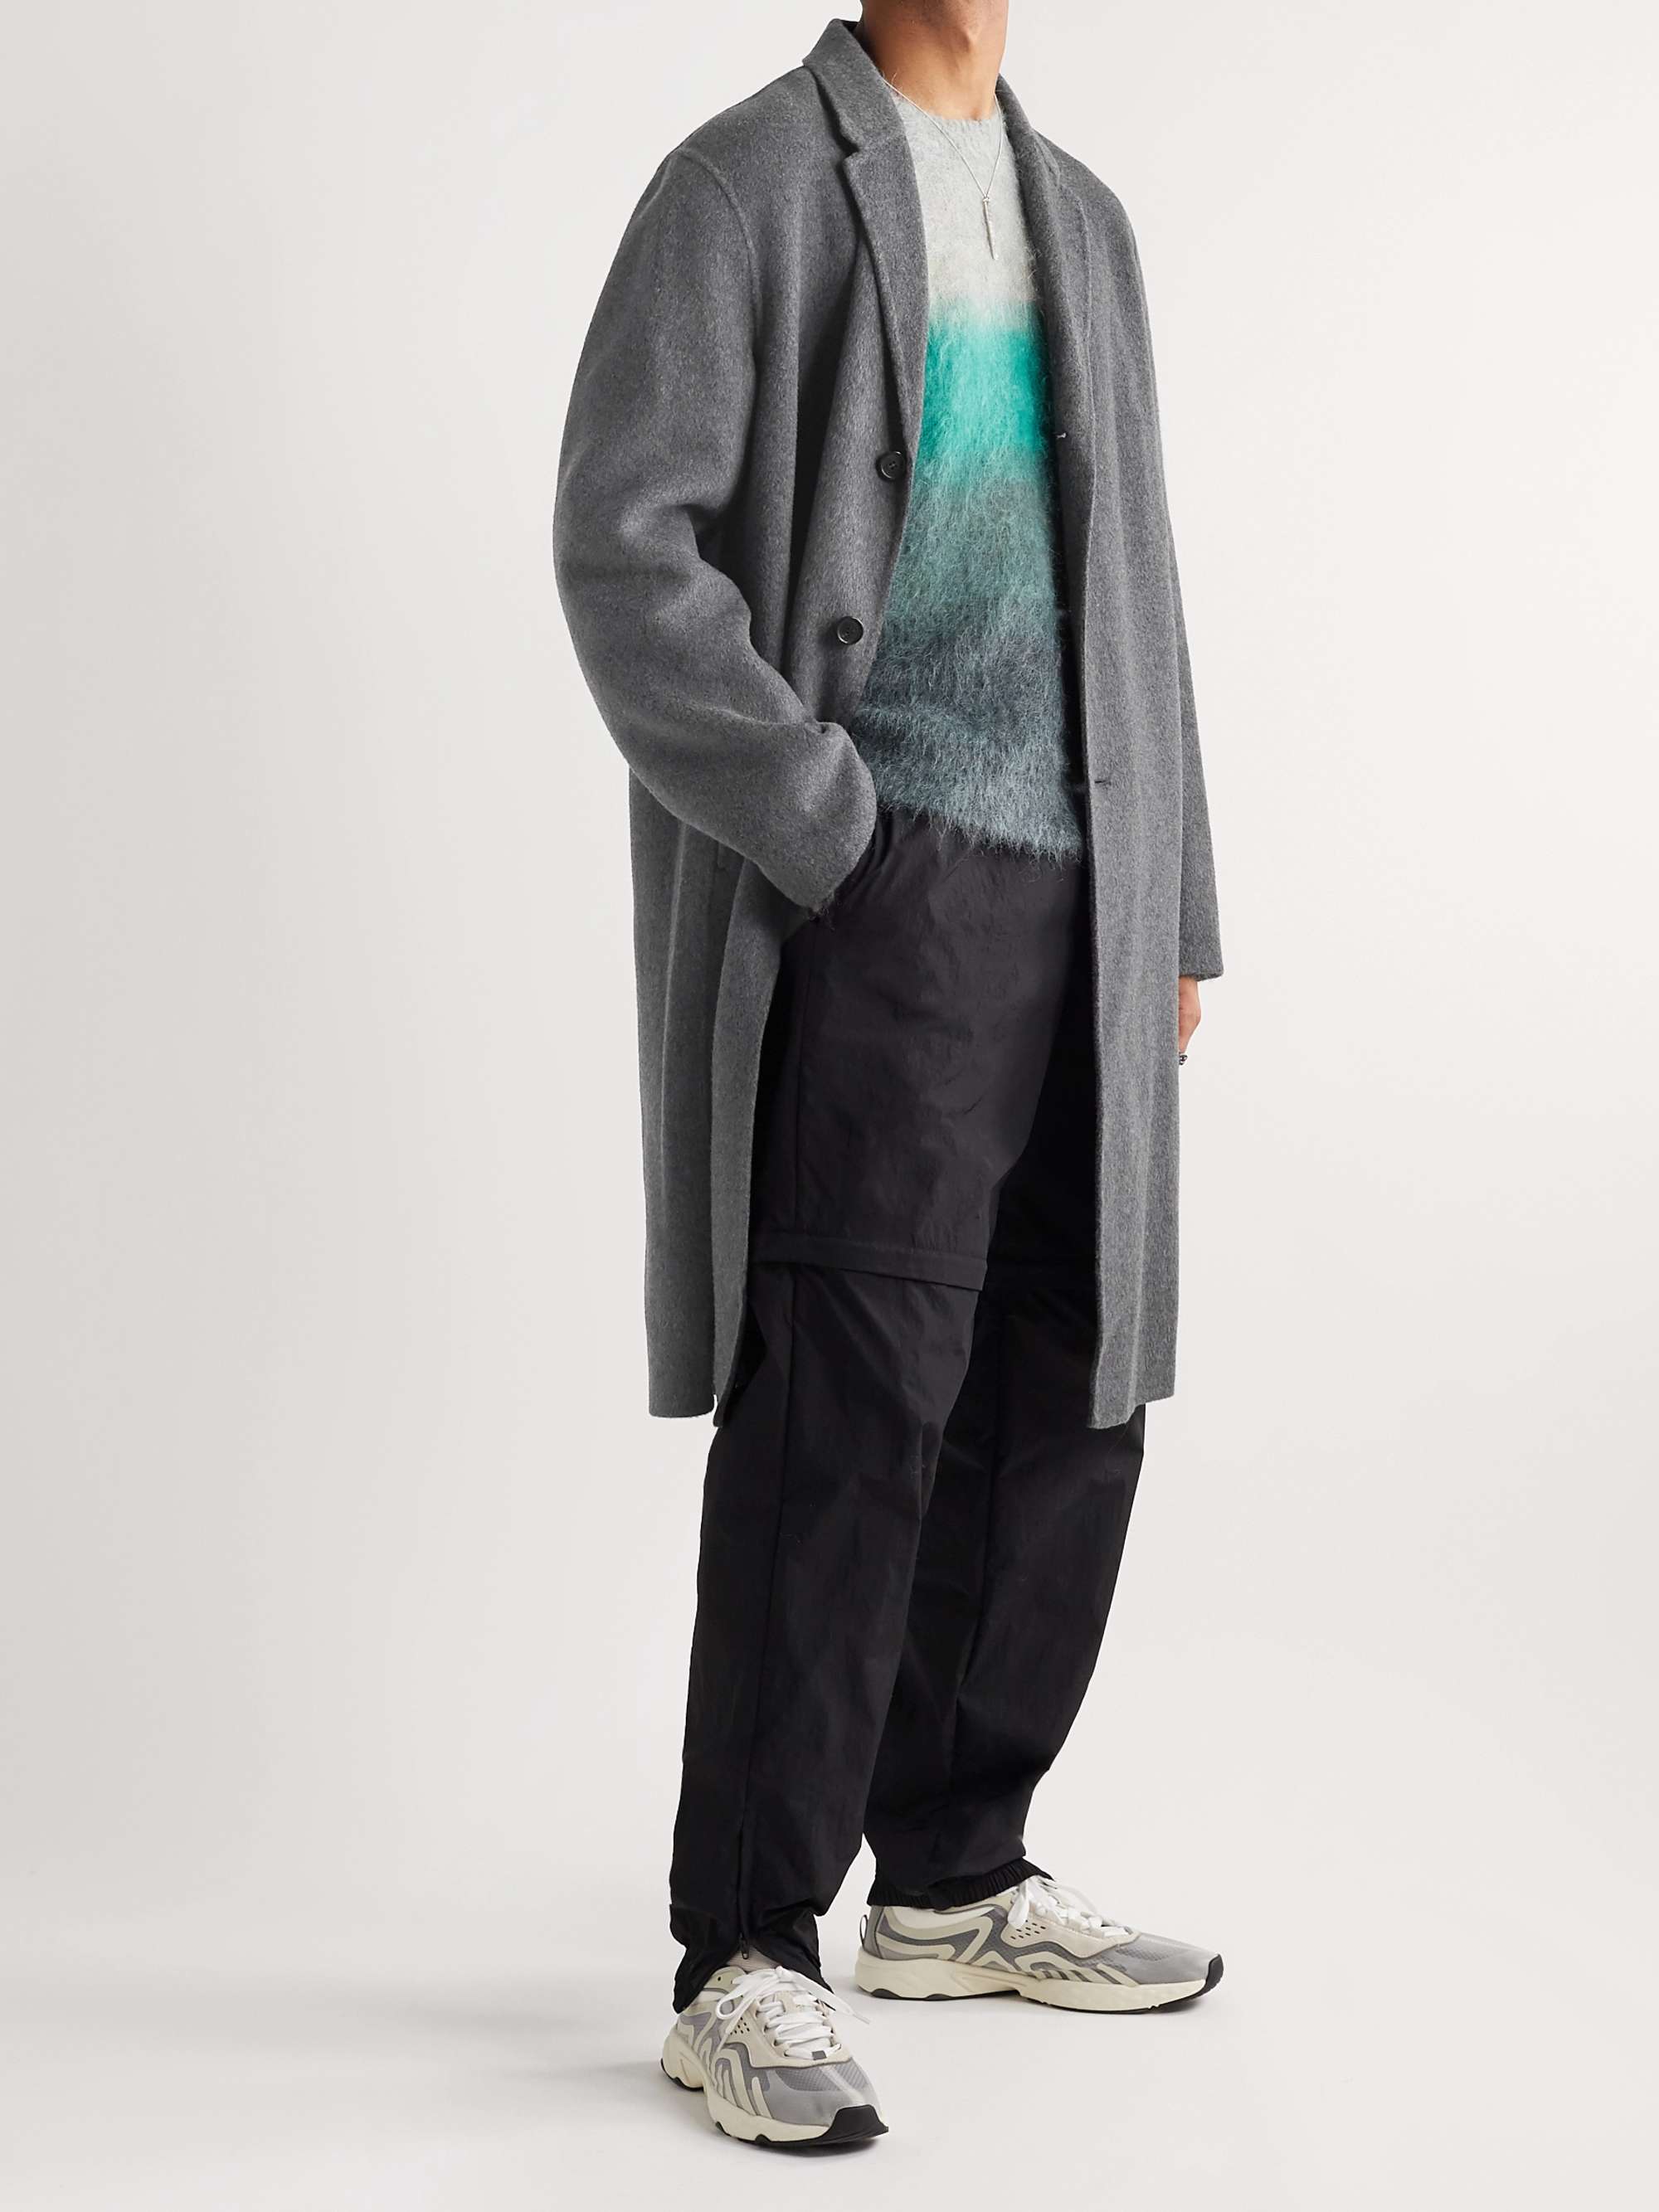 ACNE STUDIOS Chad Double-Faced Wool Coat